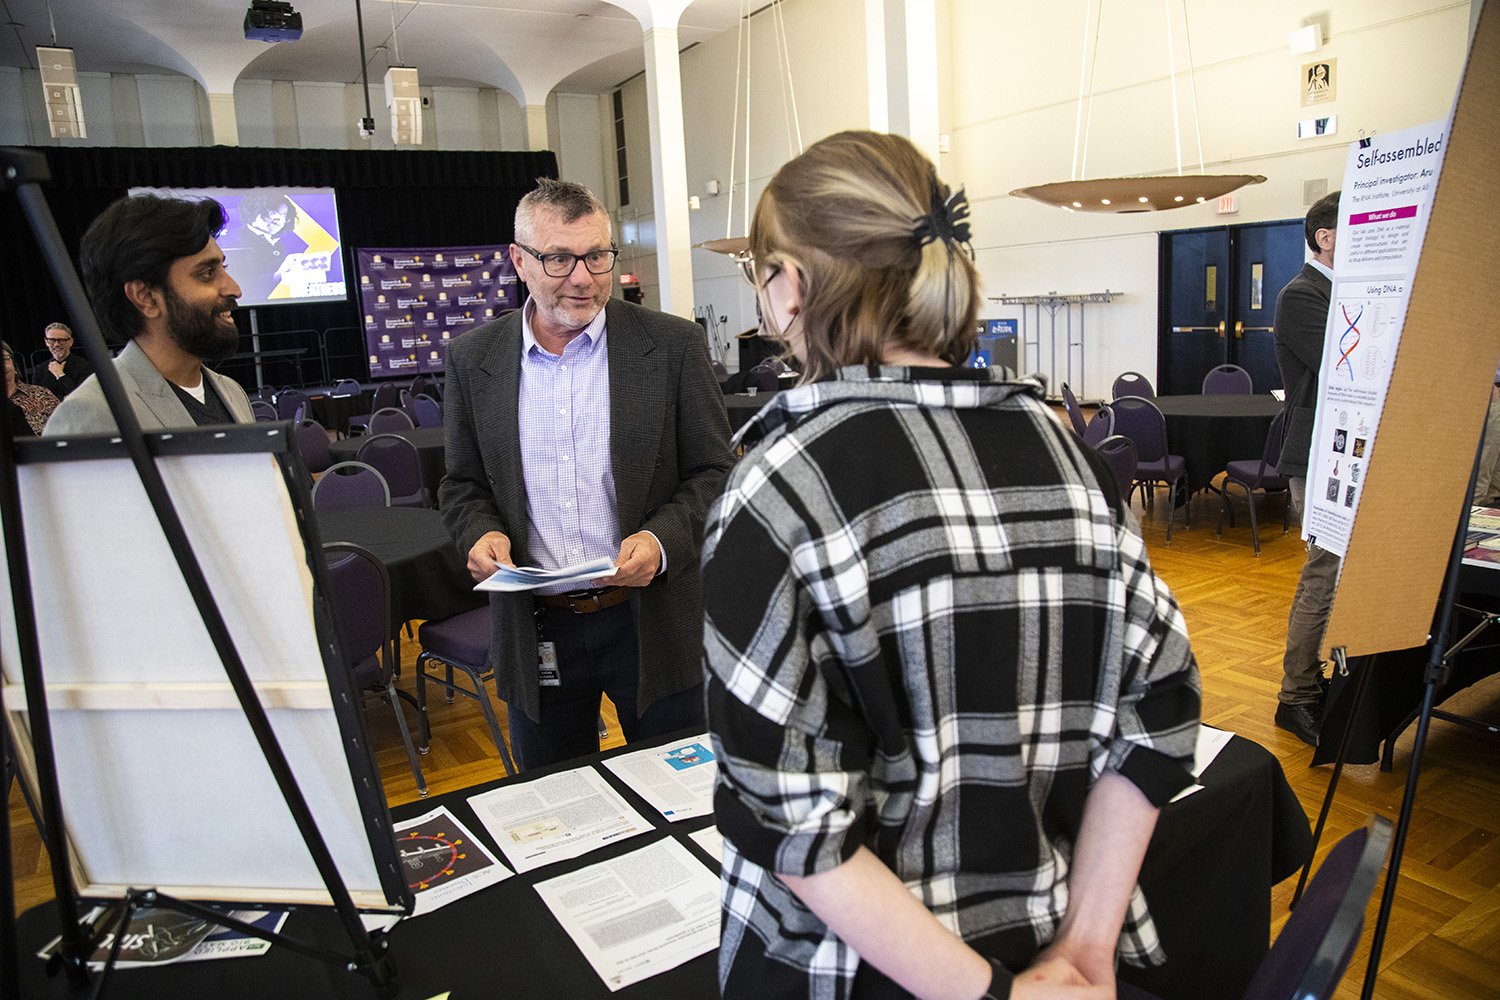 Faculty talk before the senior faculty recognition event in the Campus Center Ballroom during Research and Entrepreneurship Week at UAlbany.